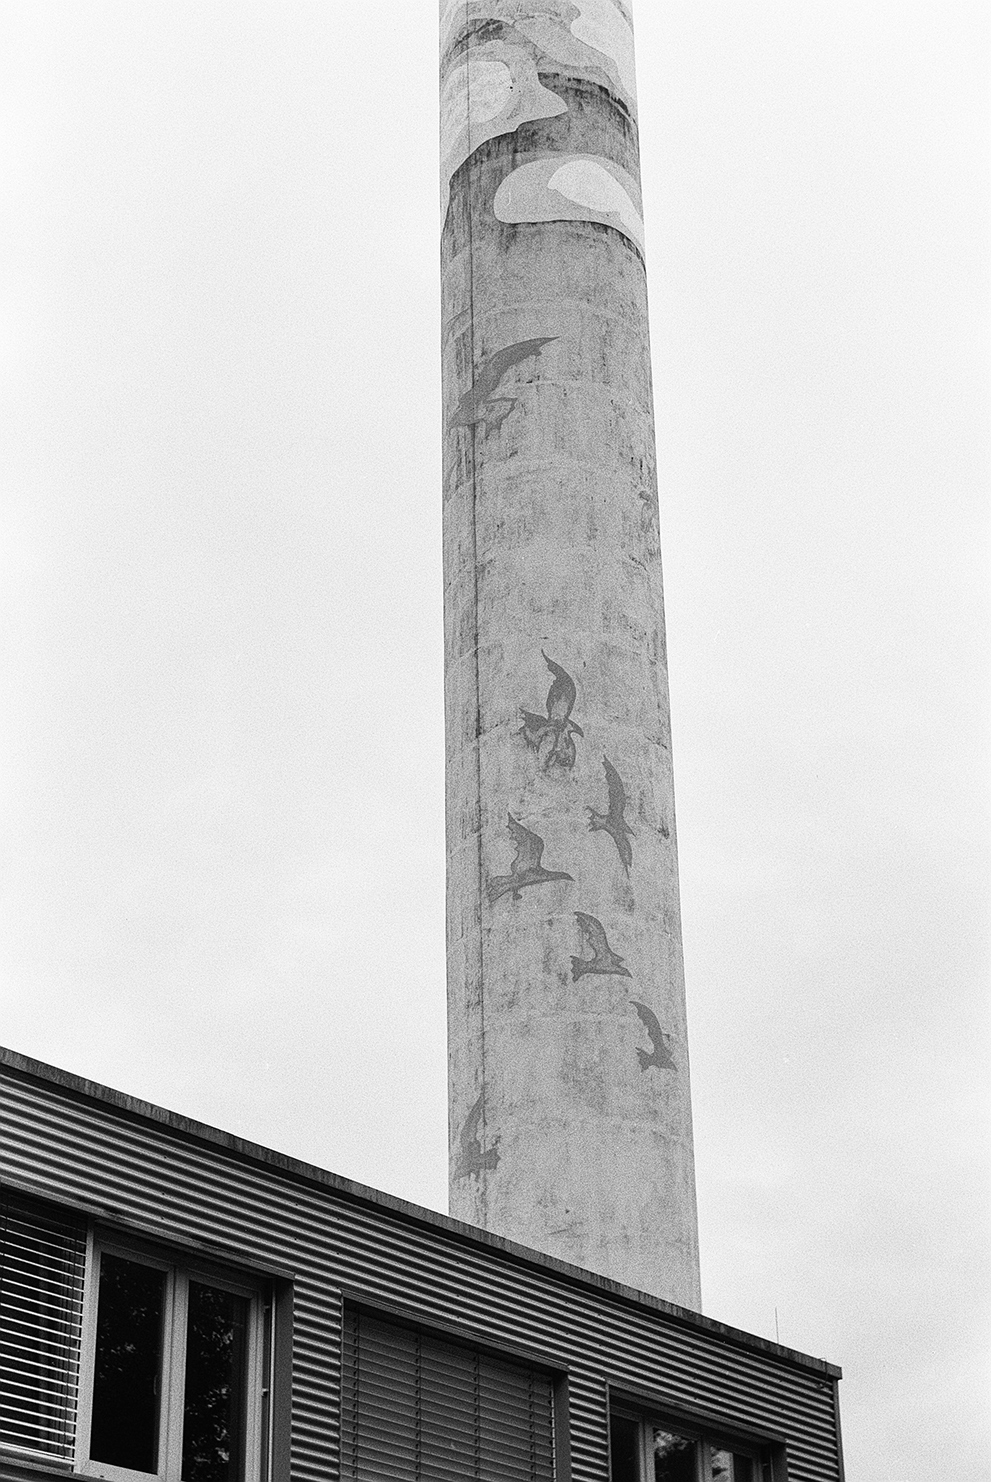 A chimney, painted with clouds and birds, pertruding from a tin shack. Shot on Fomapan 100 classic.